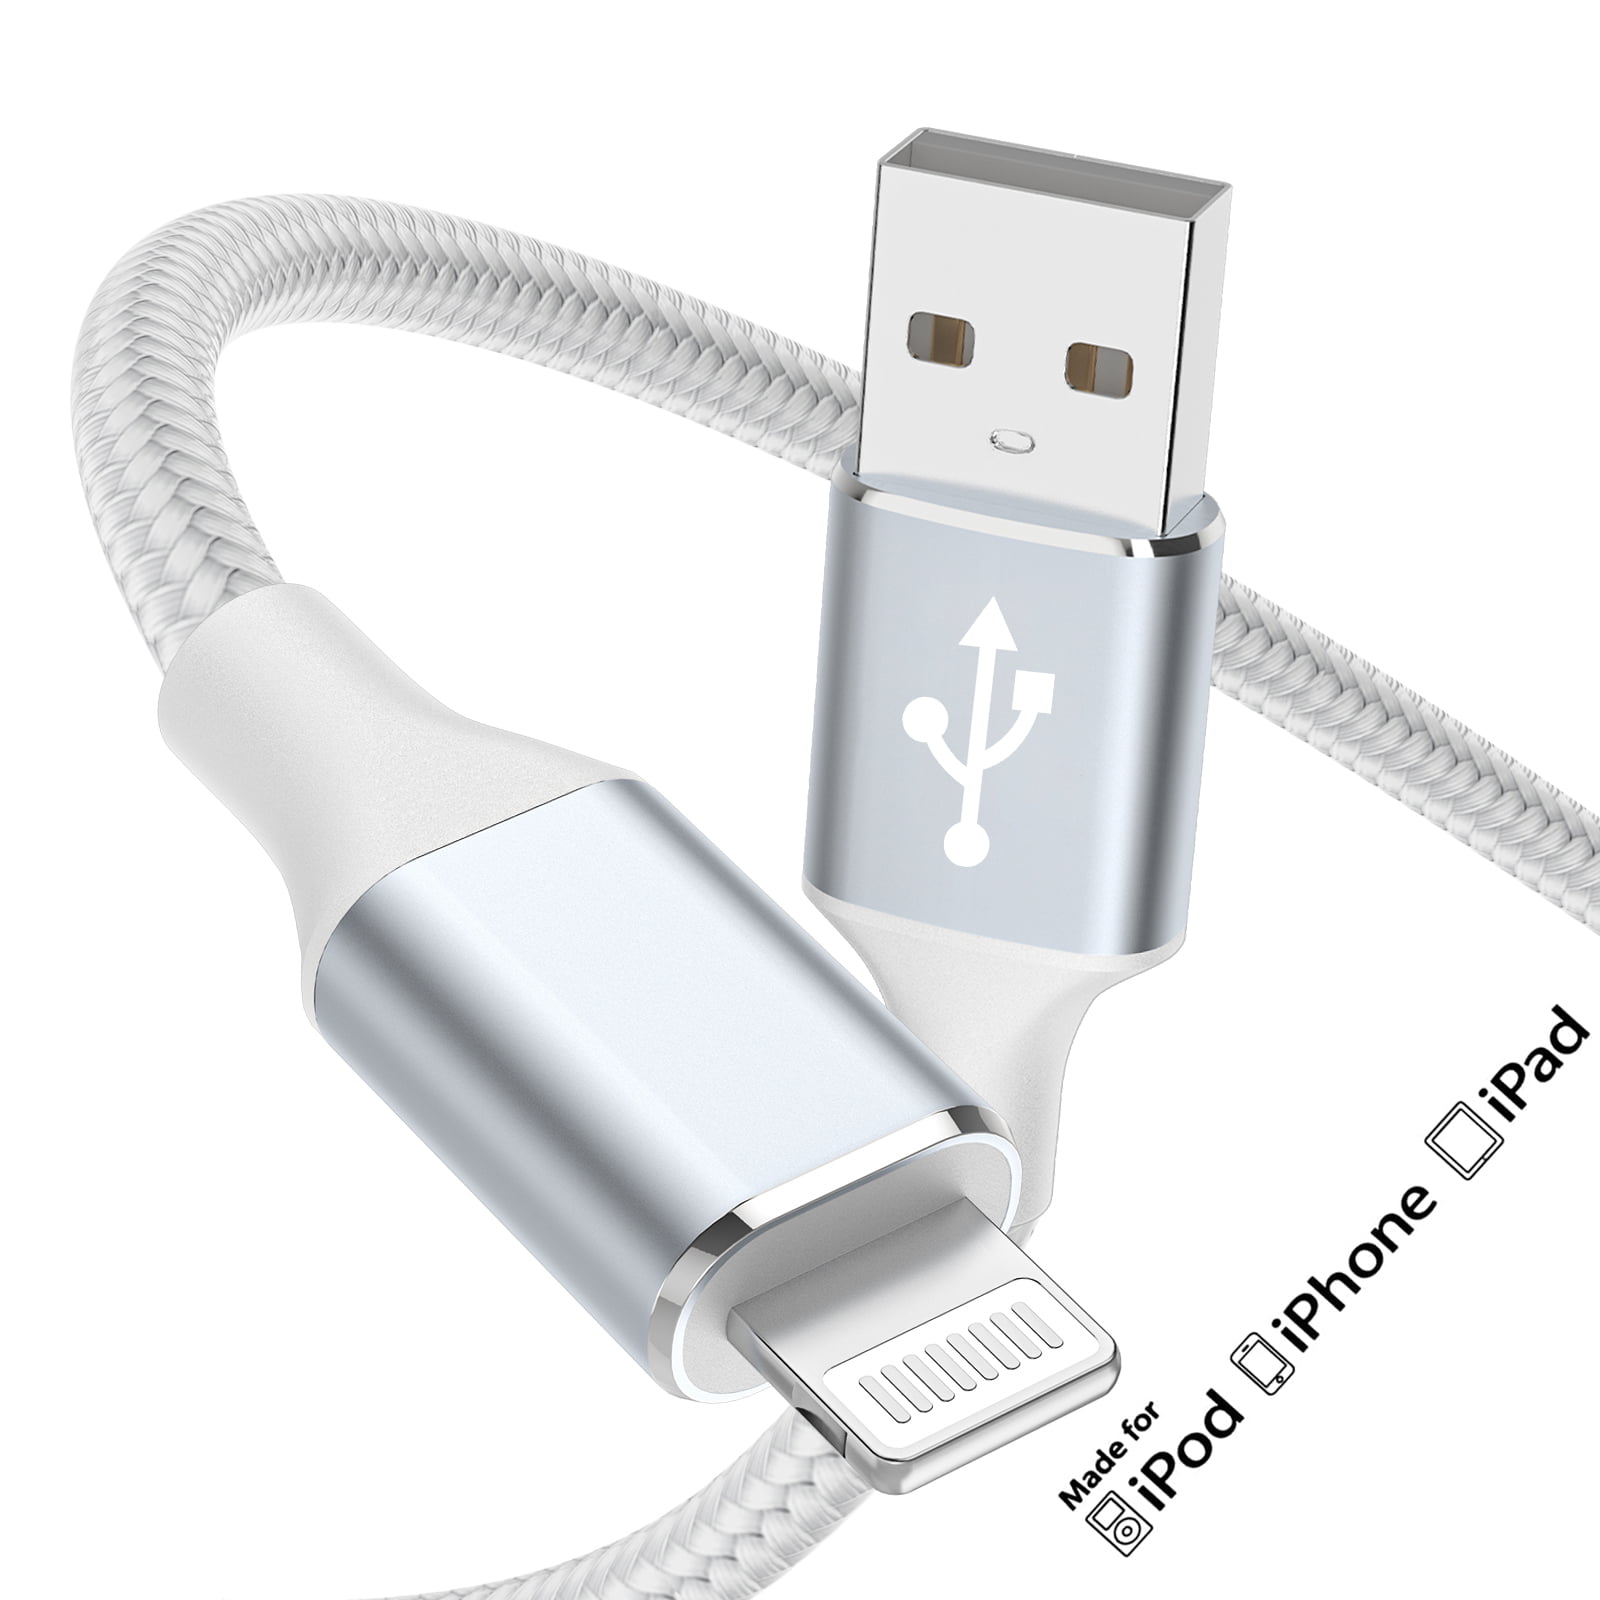 Buy Usb Cables Online in Vietnam at Best Prices